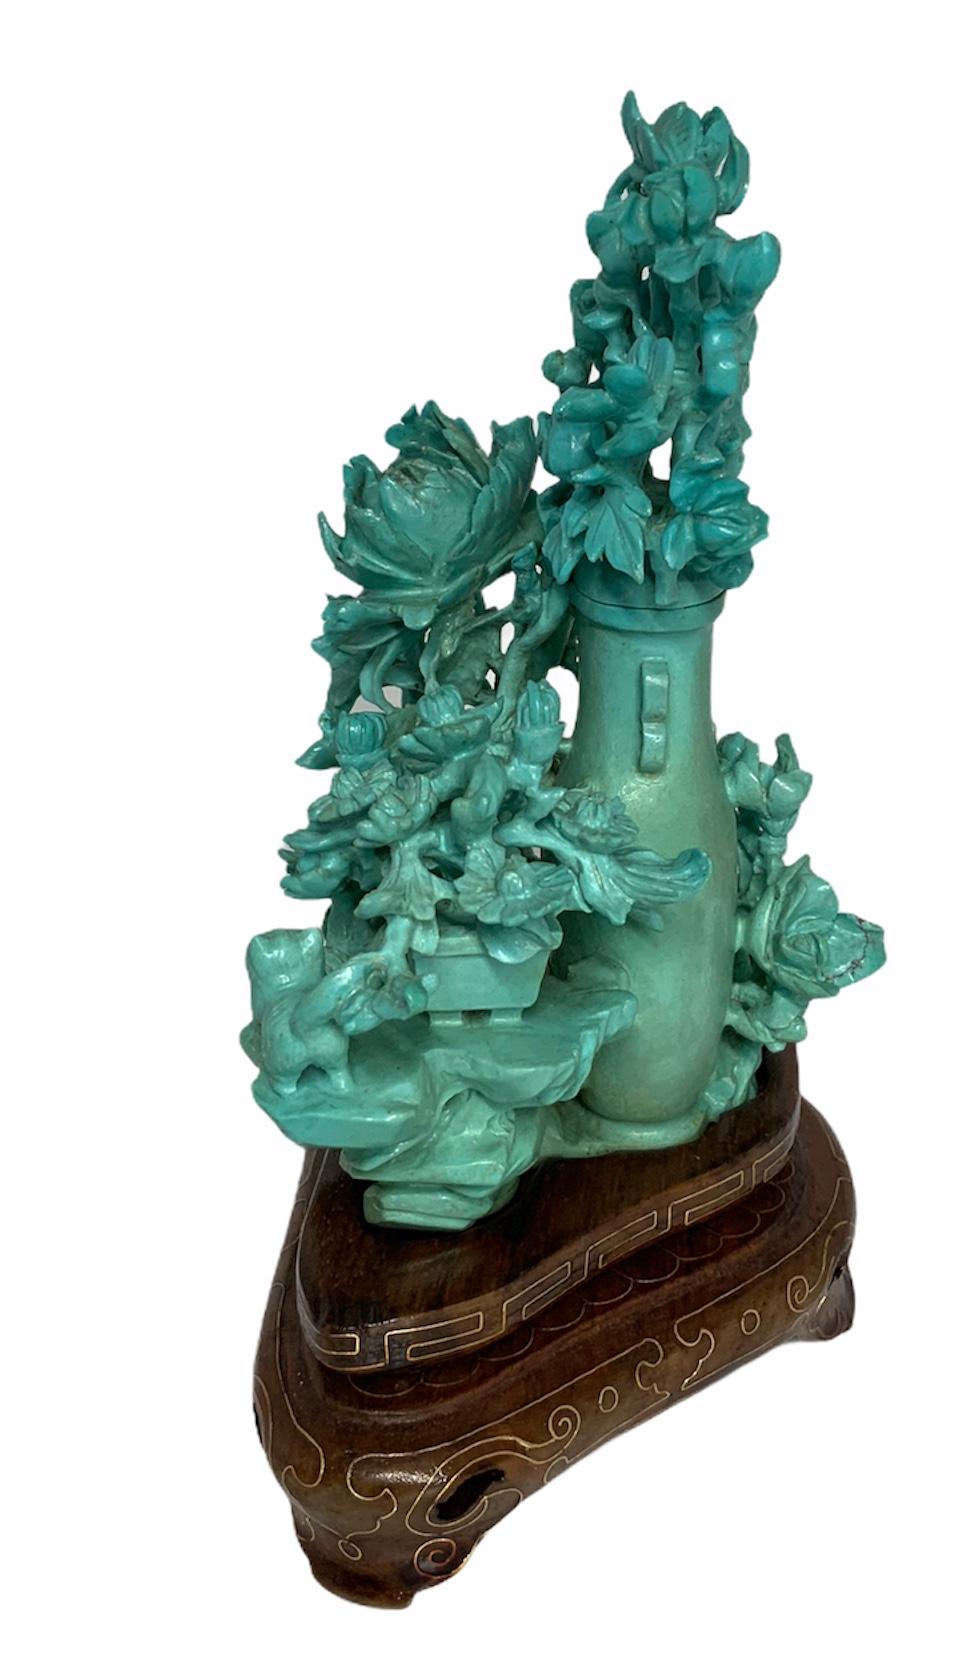 Hand-Carved Chinese Carved Turquoise Vase and Flowers Table Decor